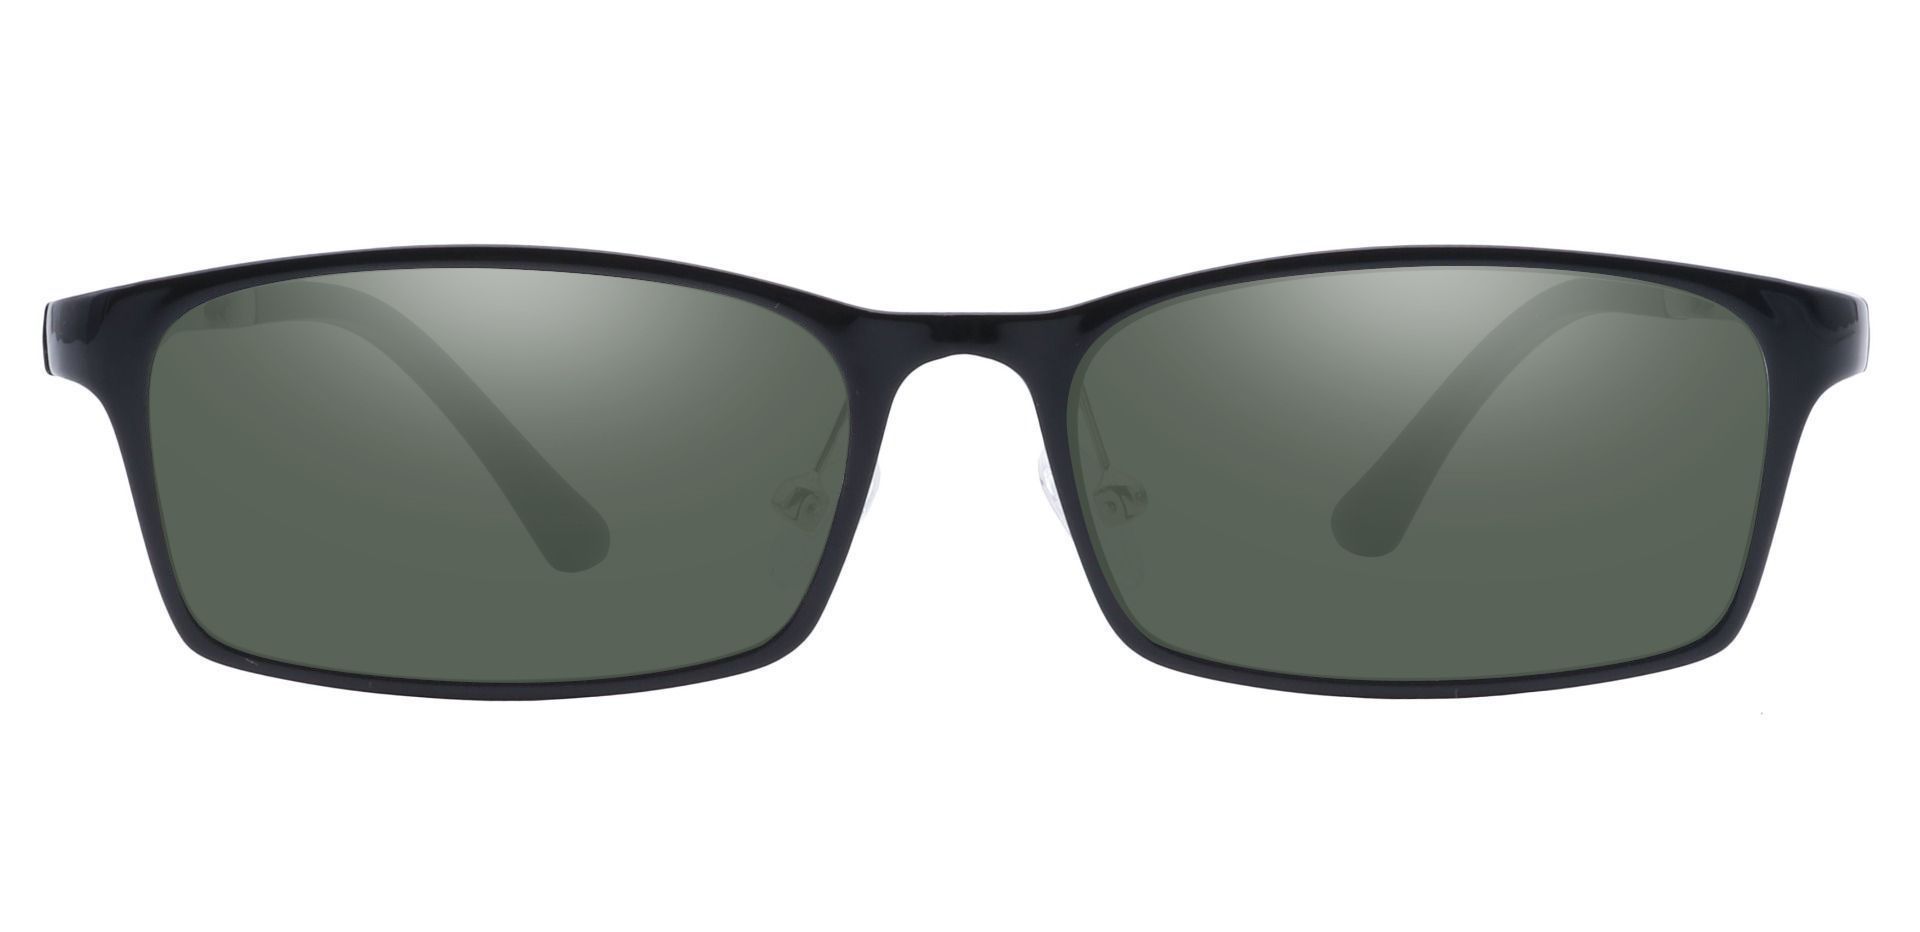 Hydra Rectangle Non-Rx Sunglasses - Black Frame With Green Lenses